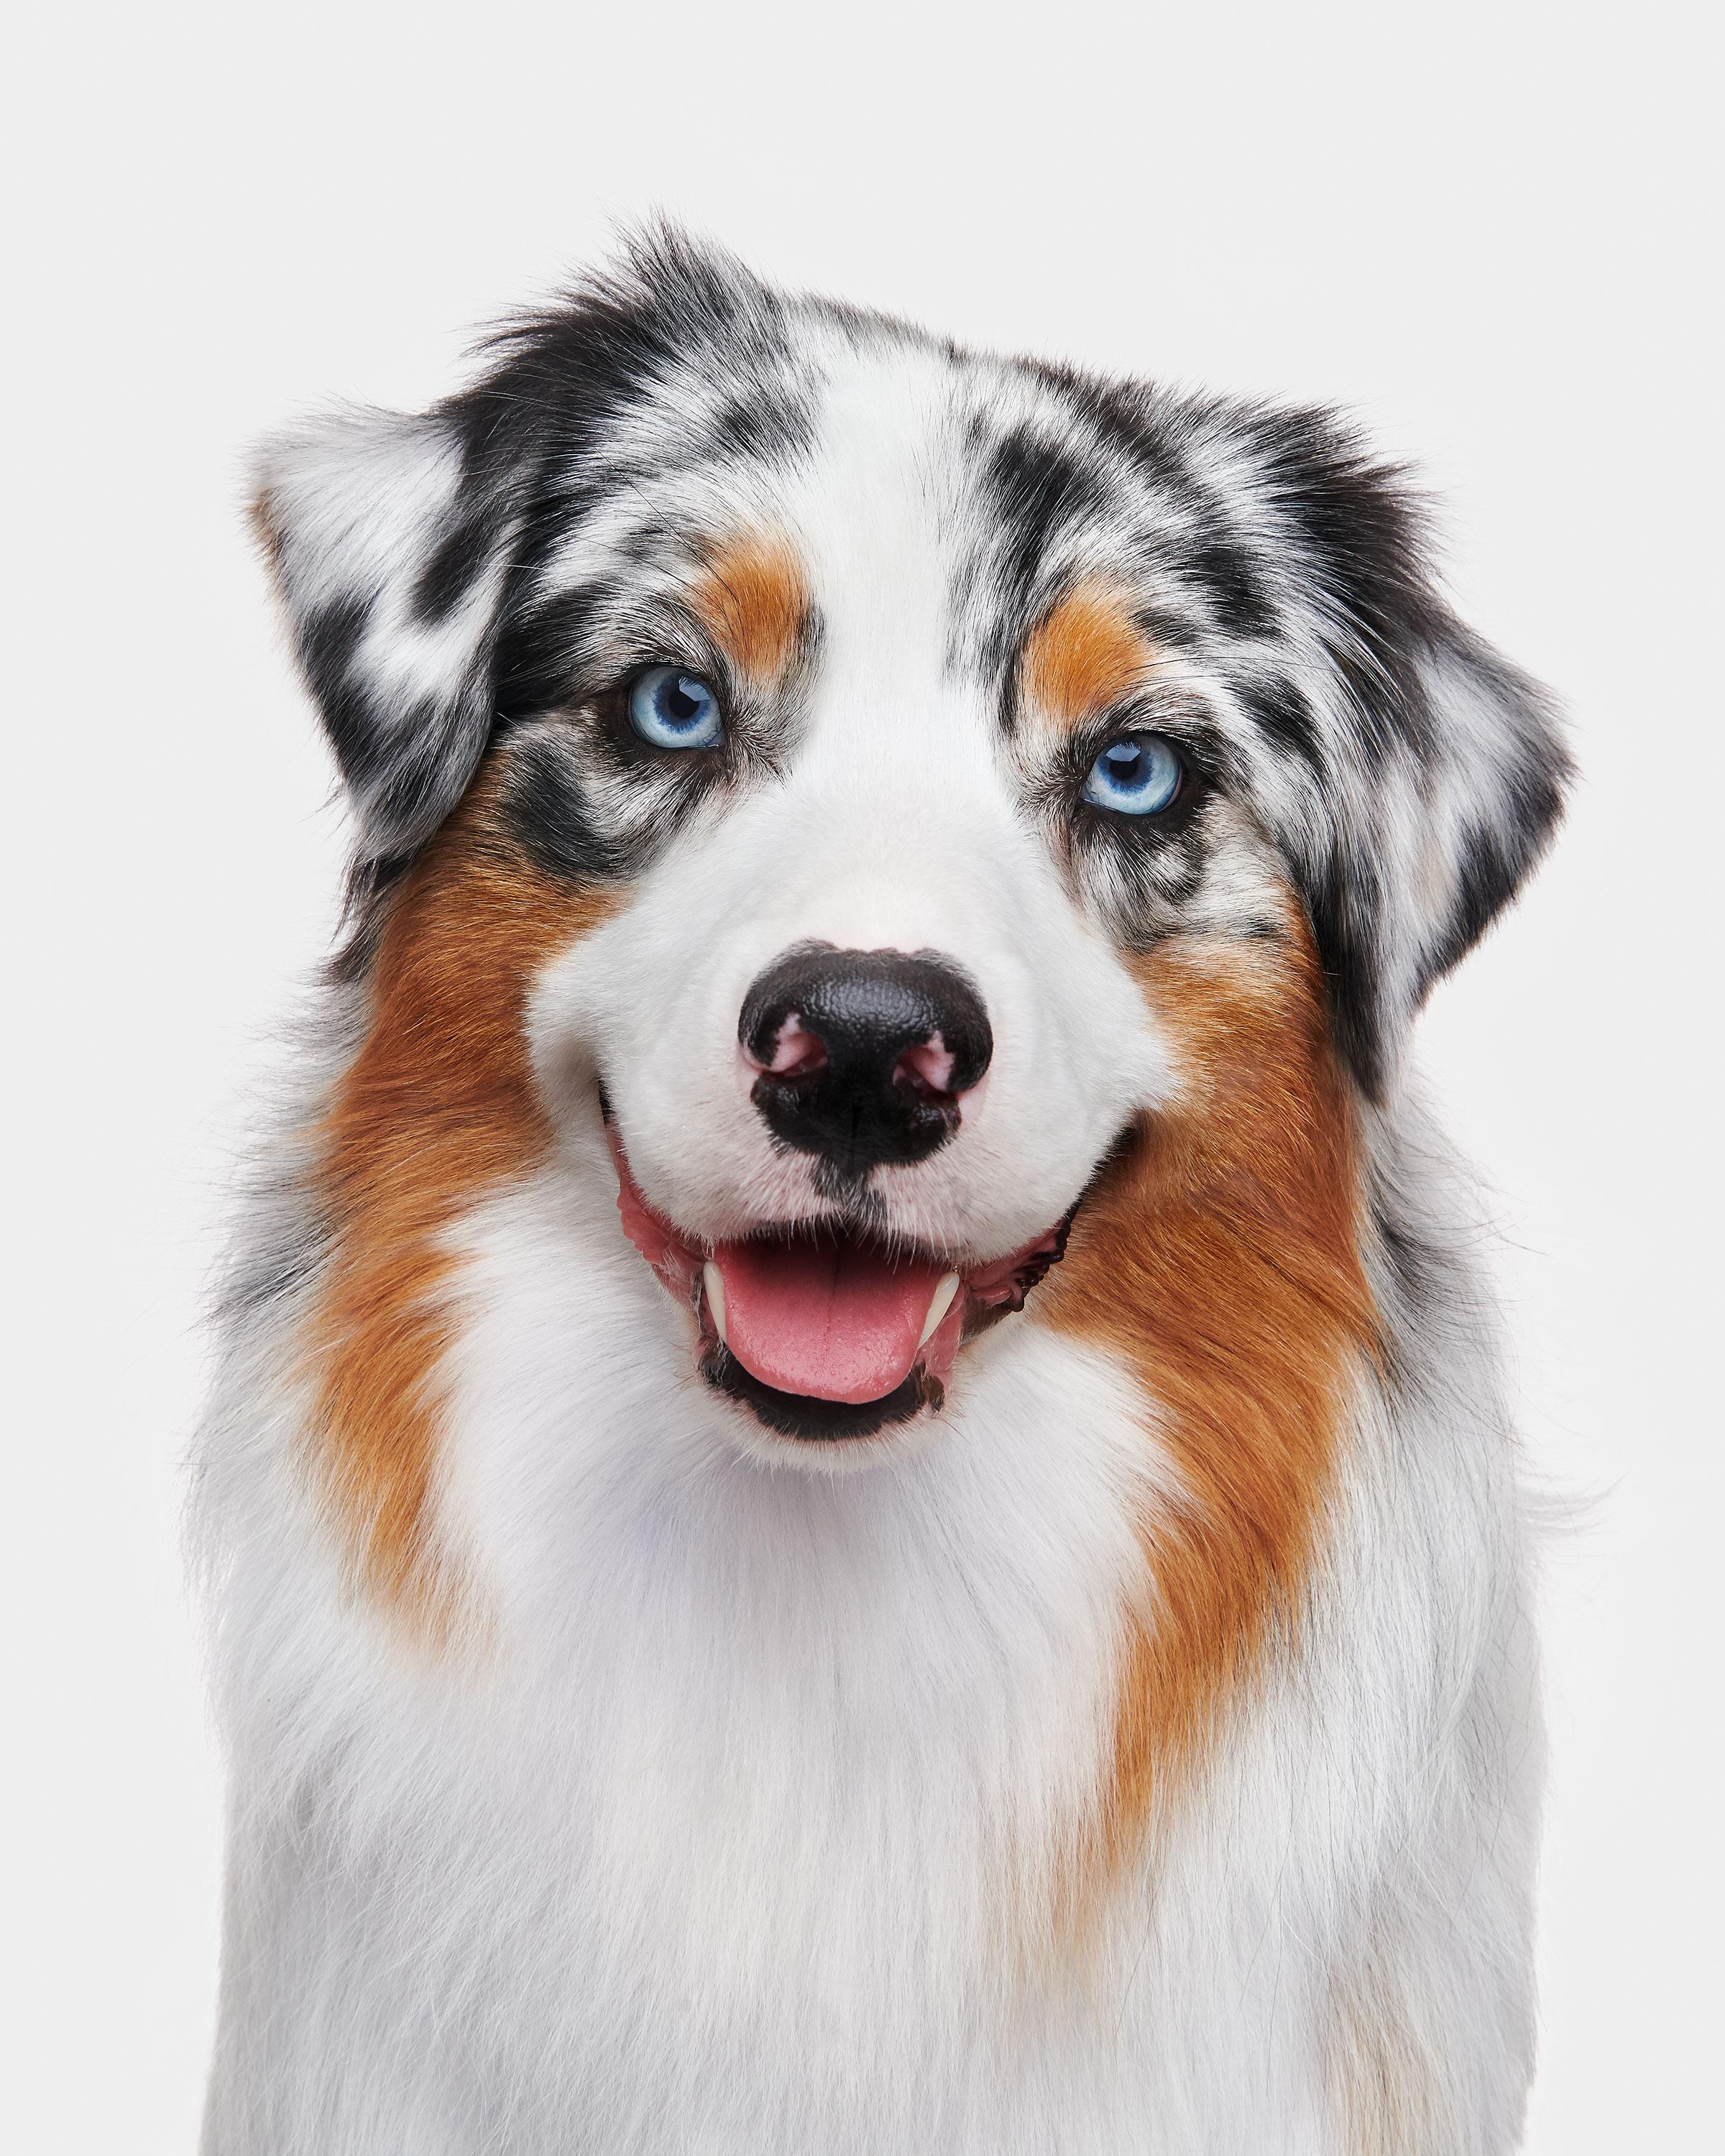 Available sizes:
37.5" x 30", Edition of 15
50" x 40", Edition of 10
60" x 48", Edition of 5

Narrative:
Giddy was just that. He showed up with such an impressive readiness to get down to business. Australian Shepherds are remarkably intelligent and